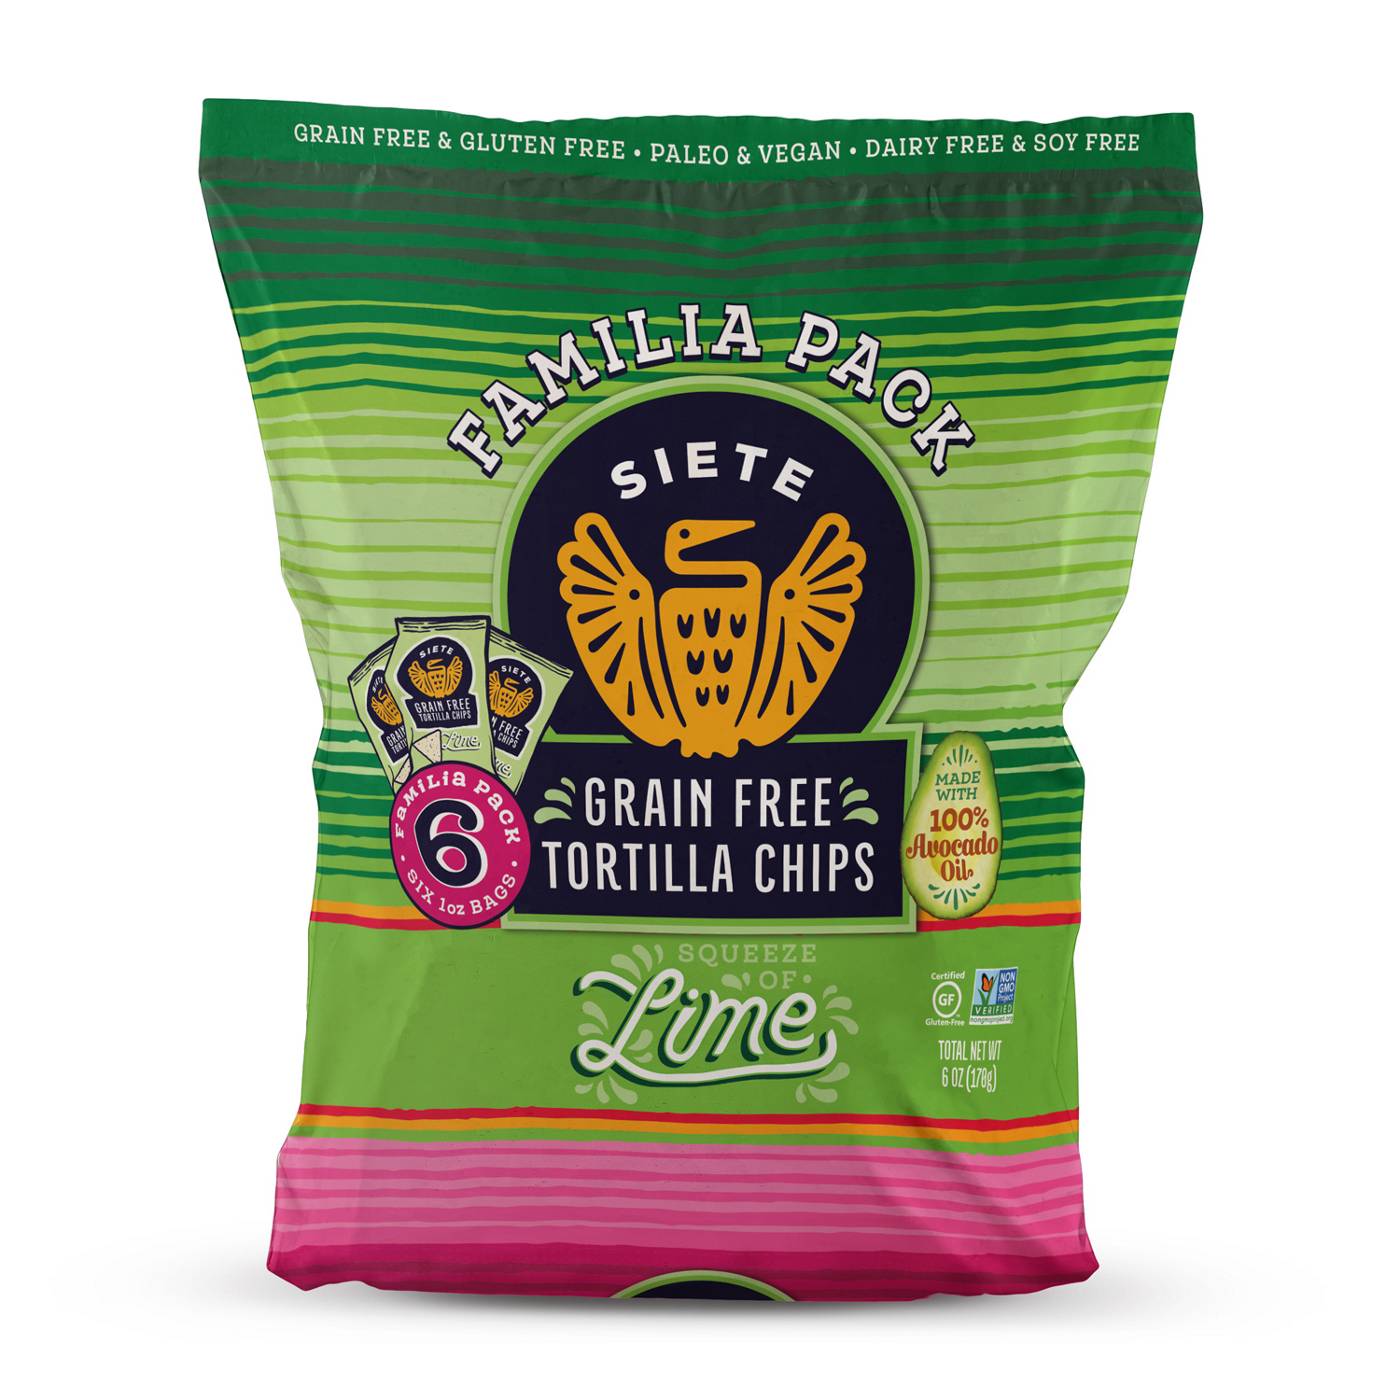 Siete Lime Tortilla Chips Familia Pack 1 oz Bags; image 1 of 4